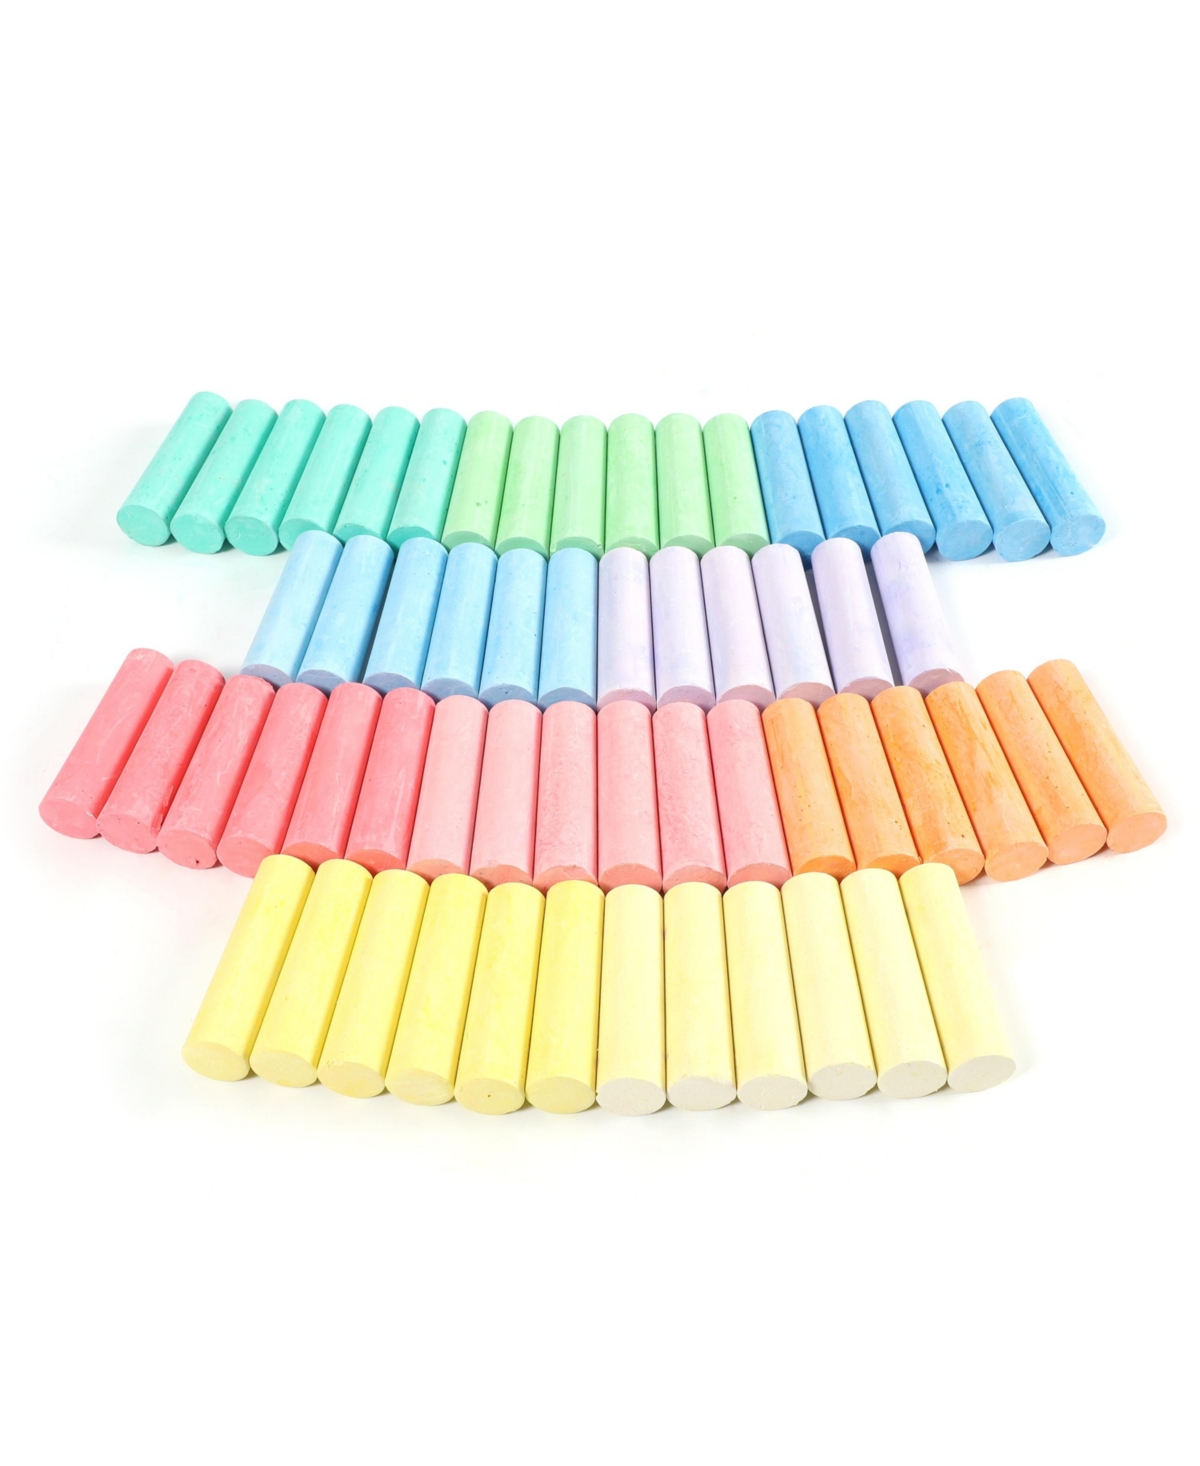 Sizzlin Cool Jumbo Sidewalk Chalk Set, 60 Pieces, Created for You by Toys R Us